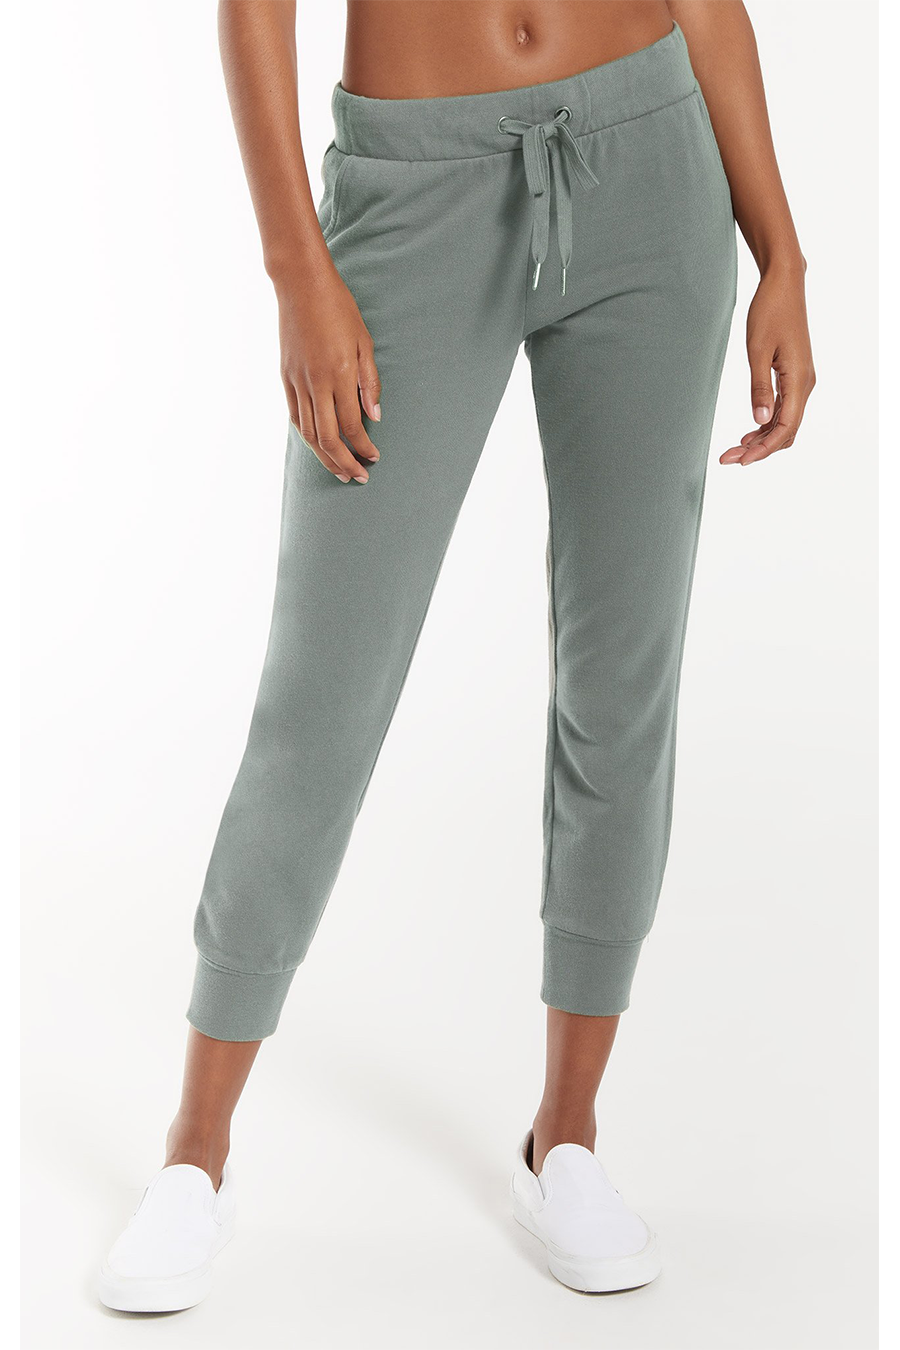 Quinn Classic Jogger | Ash Green - Main Image Number 1 of 3